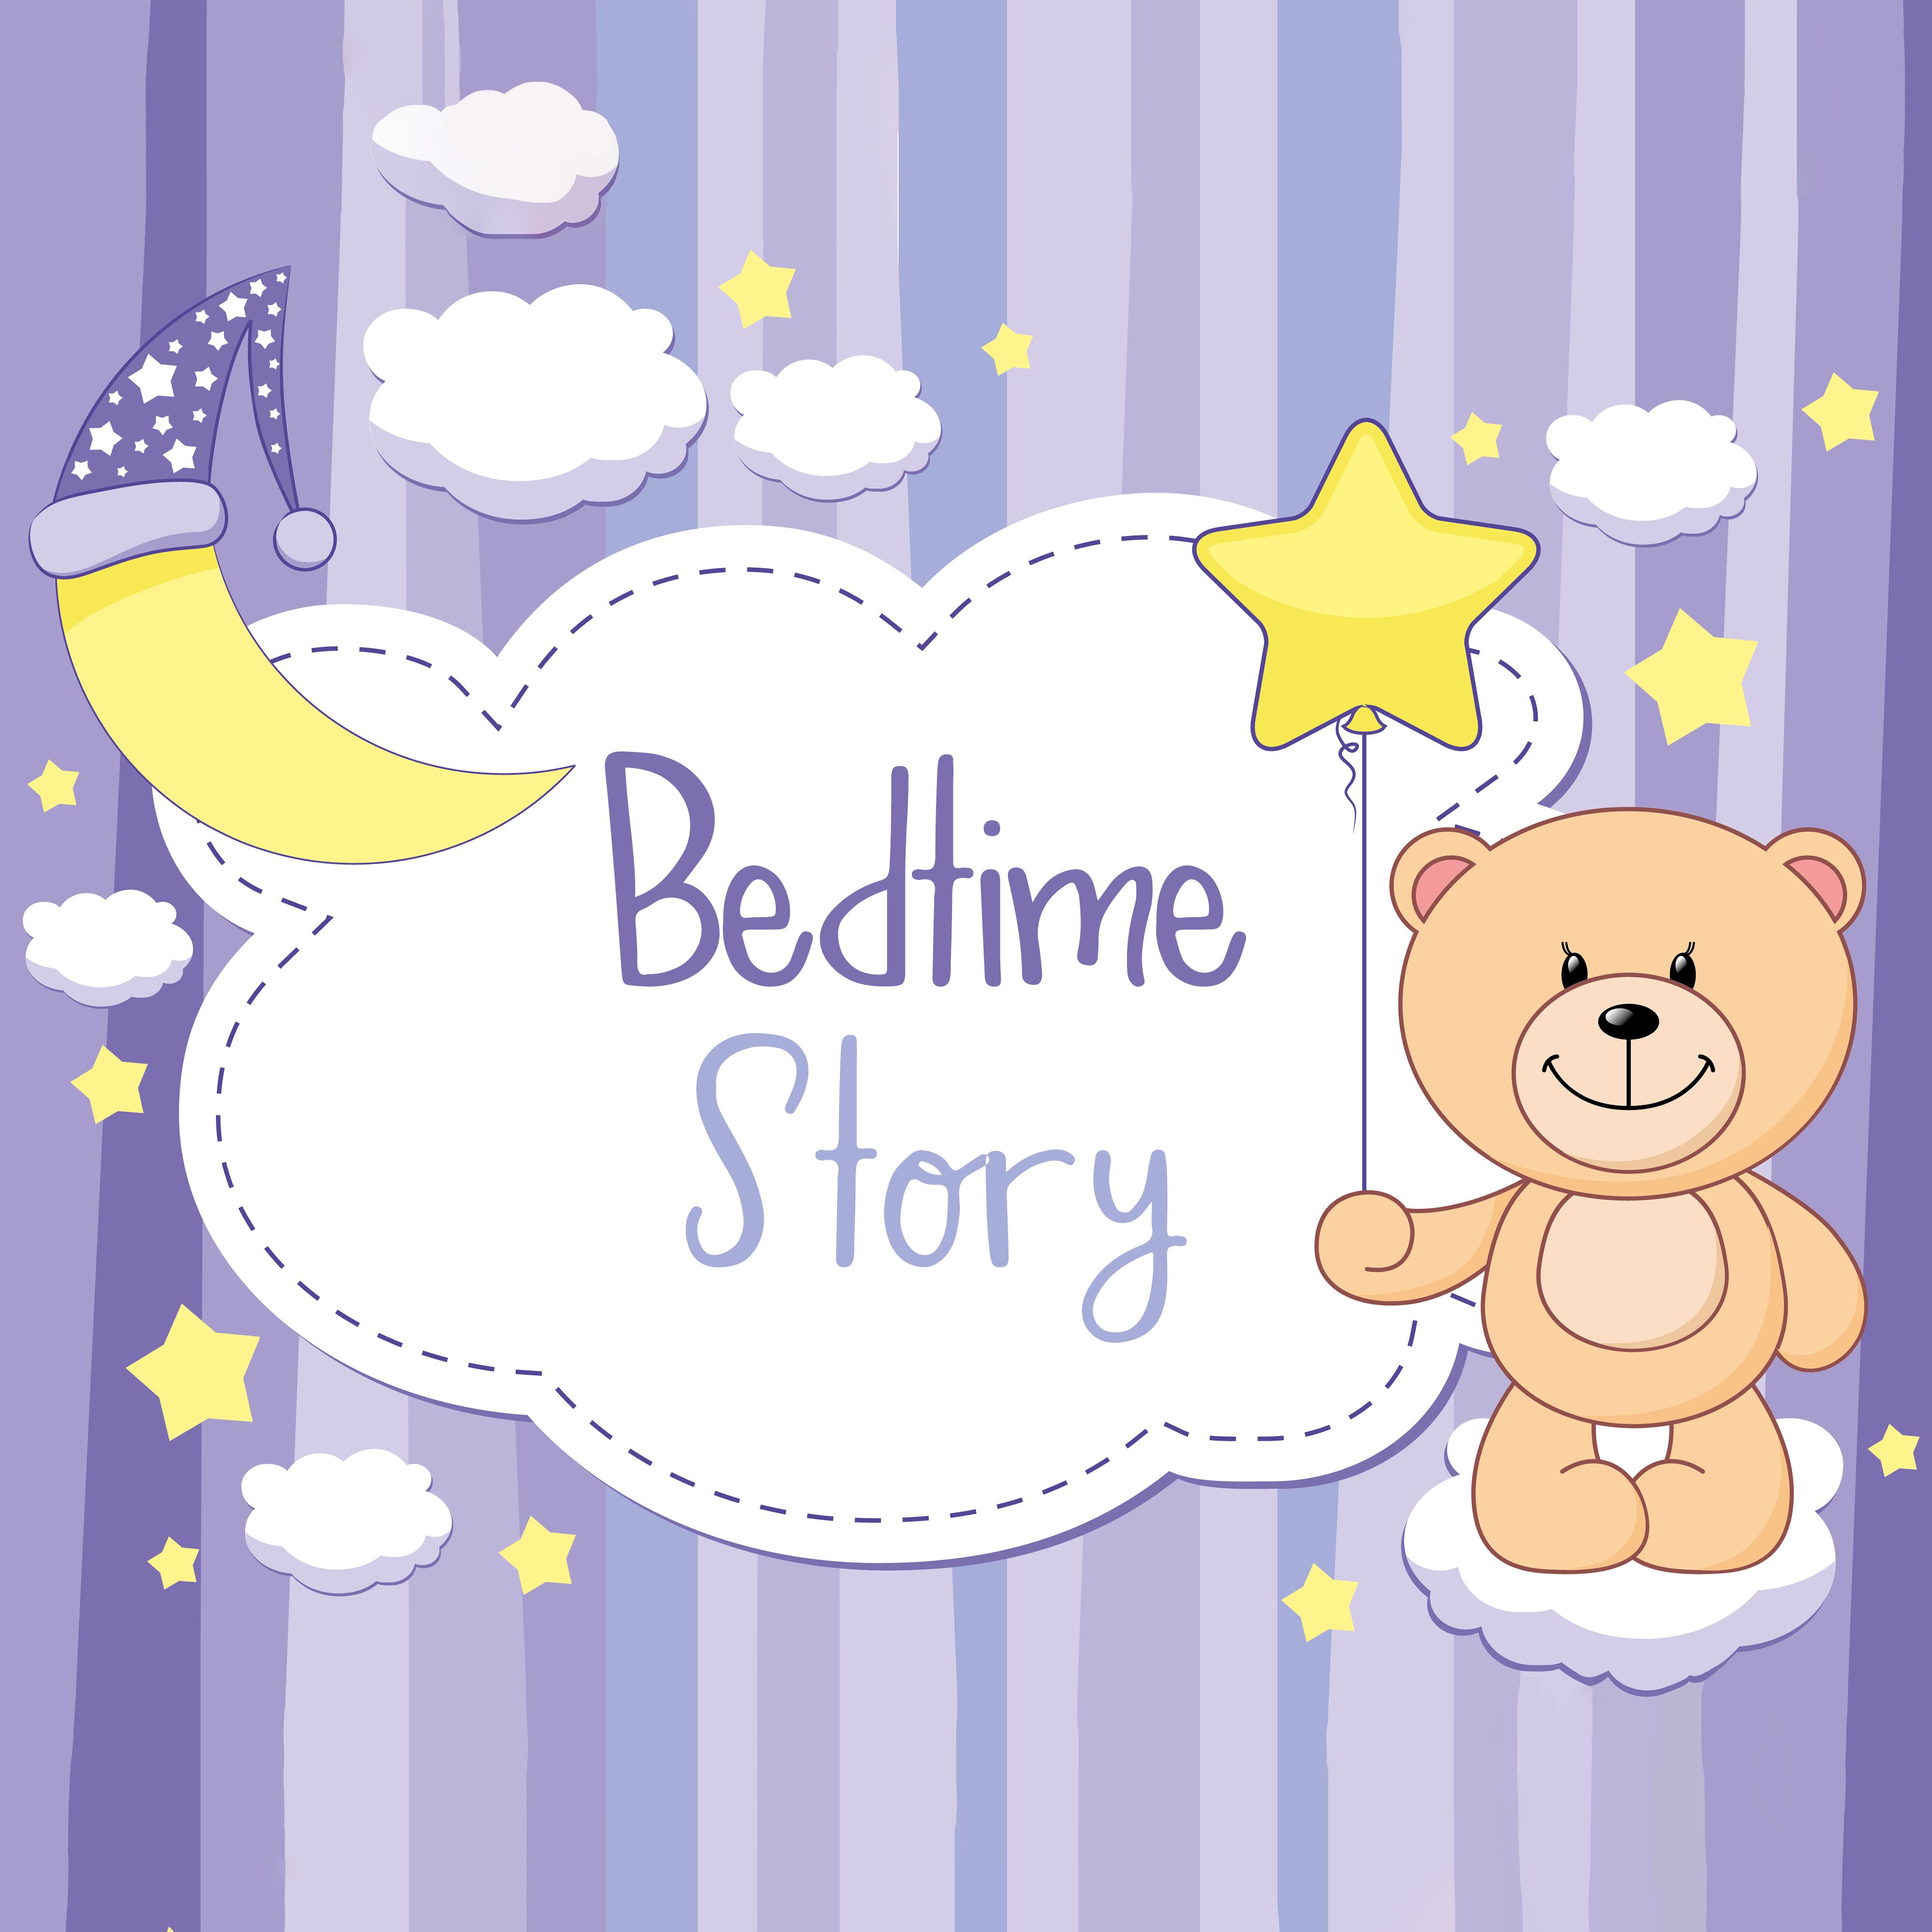 Bedtime Story: Music Background for Reading Fairy Tales, Goodnight Stories and to Put the Baby to Sleep